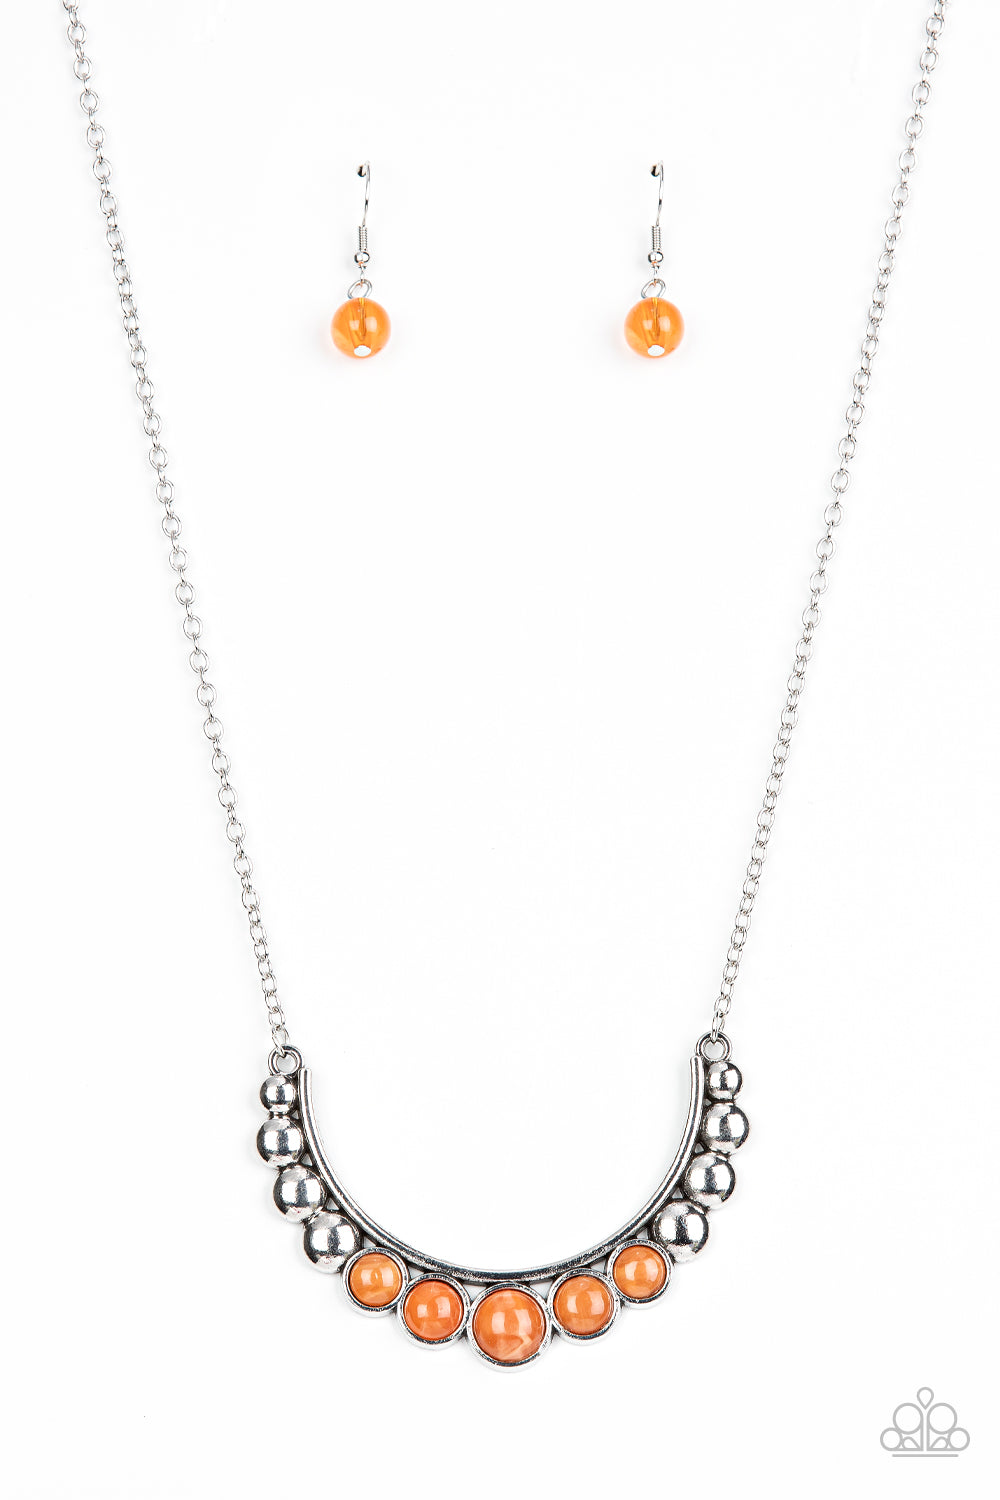 silver, silver jewelry, affordable jewelry, paparazzi accessories, everyday accessories, orange, moon stone, necklace, medium necklace, 